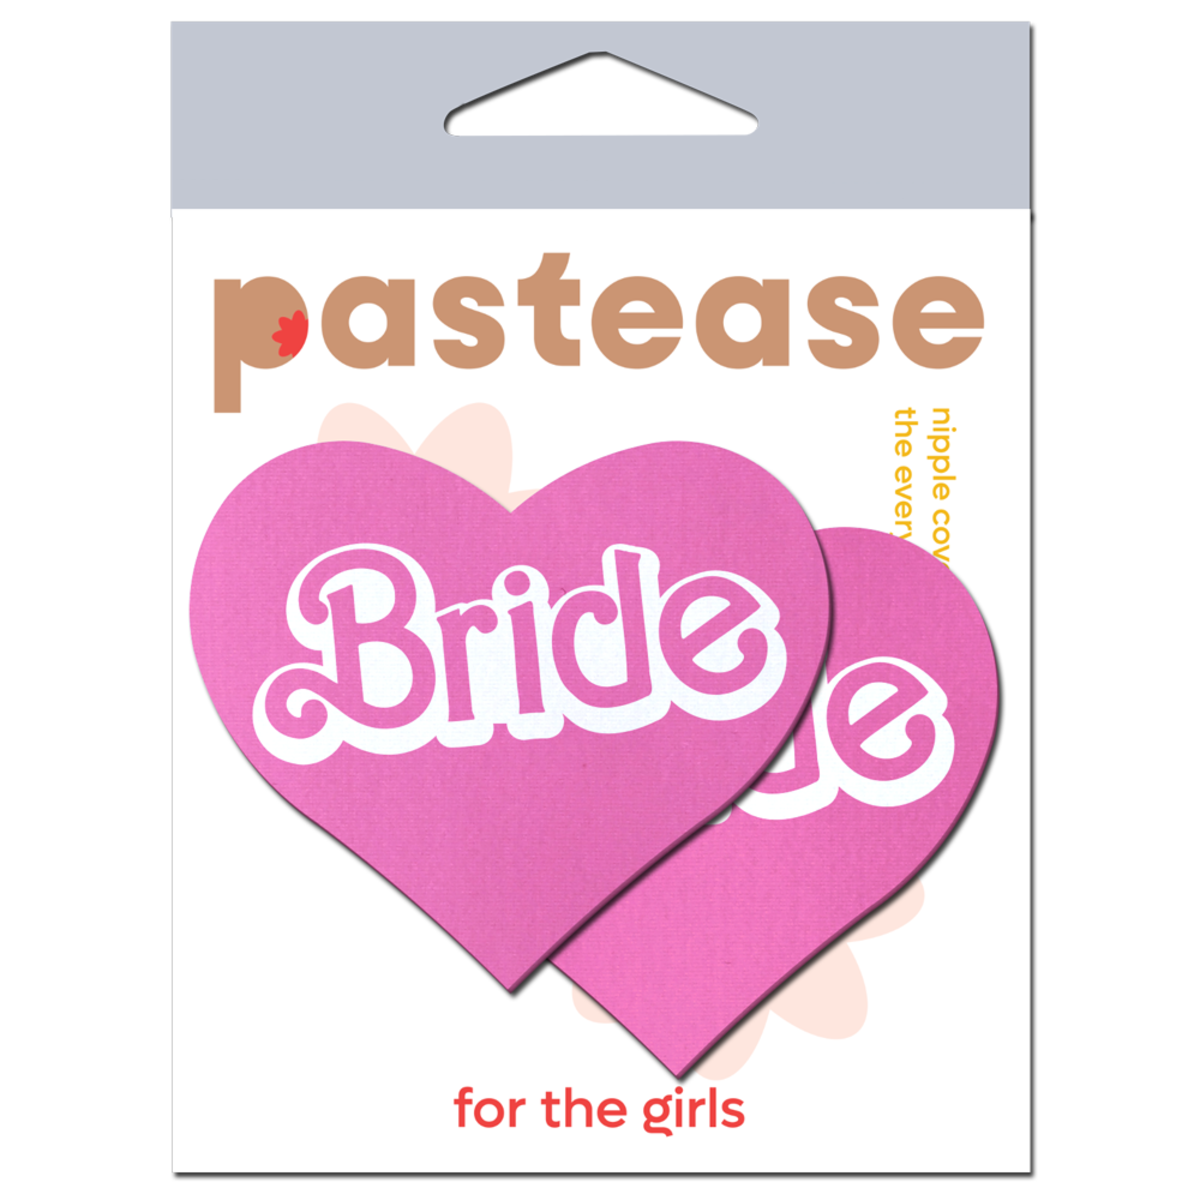 'Bride' Doll Pasties Pink Iconic Heart